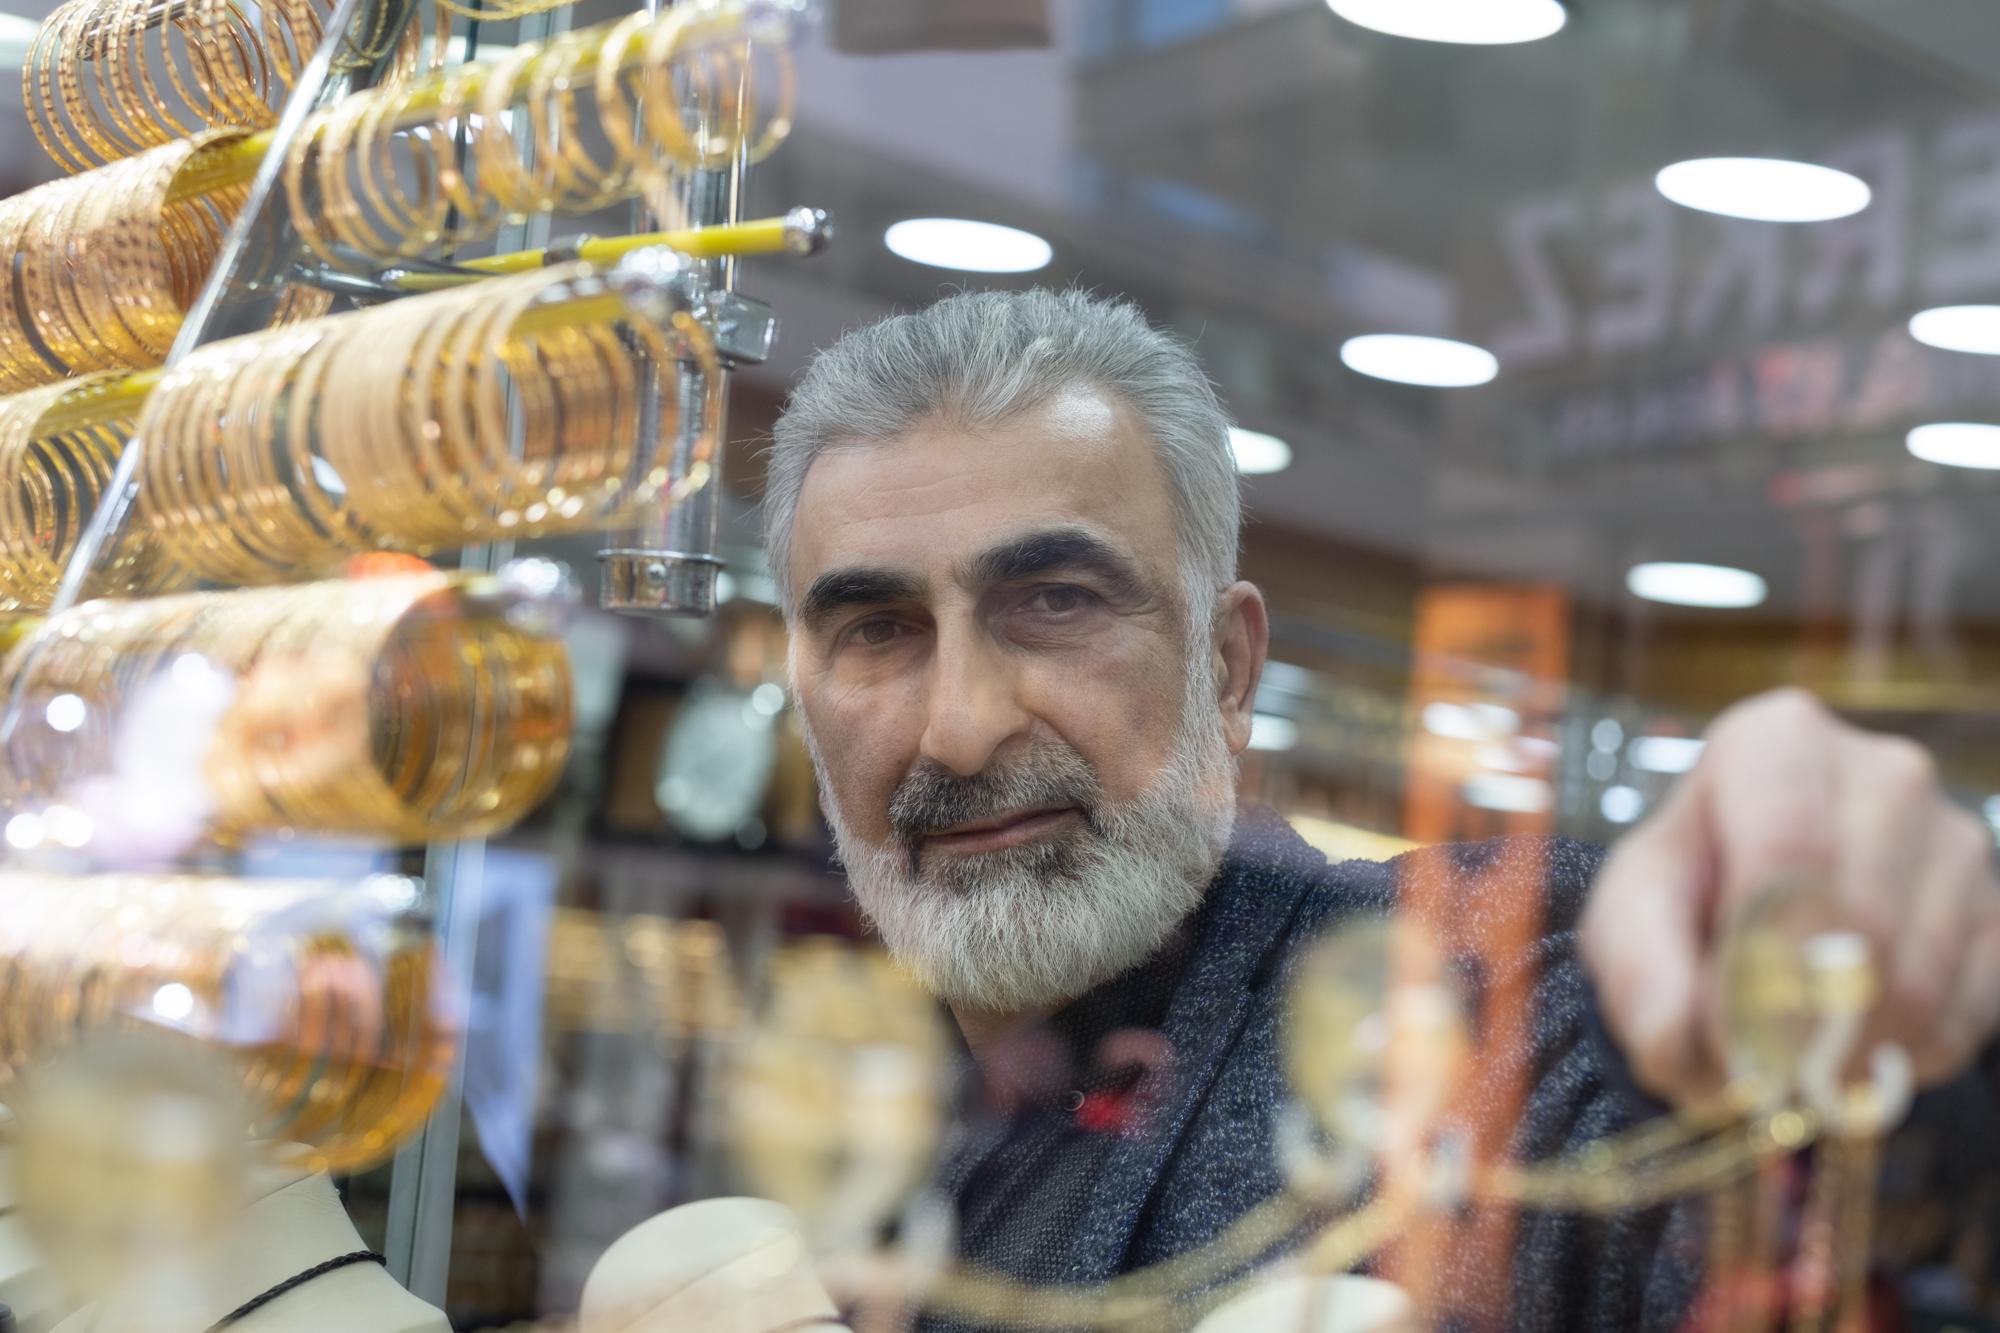 General elections in Turkey - 2023 - Mehmet Bulut is a jeweler in the city center of Rize. He...